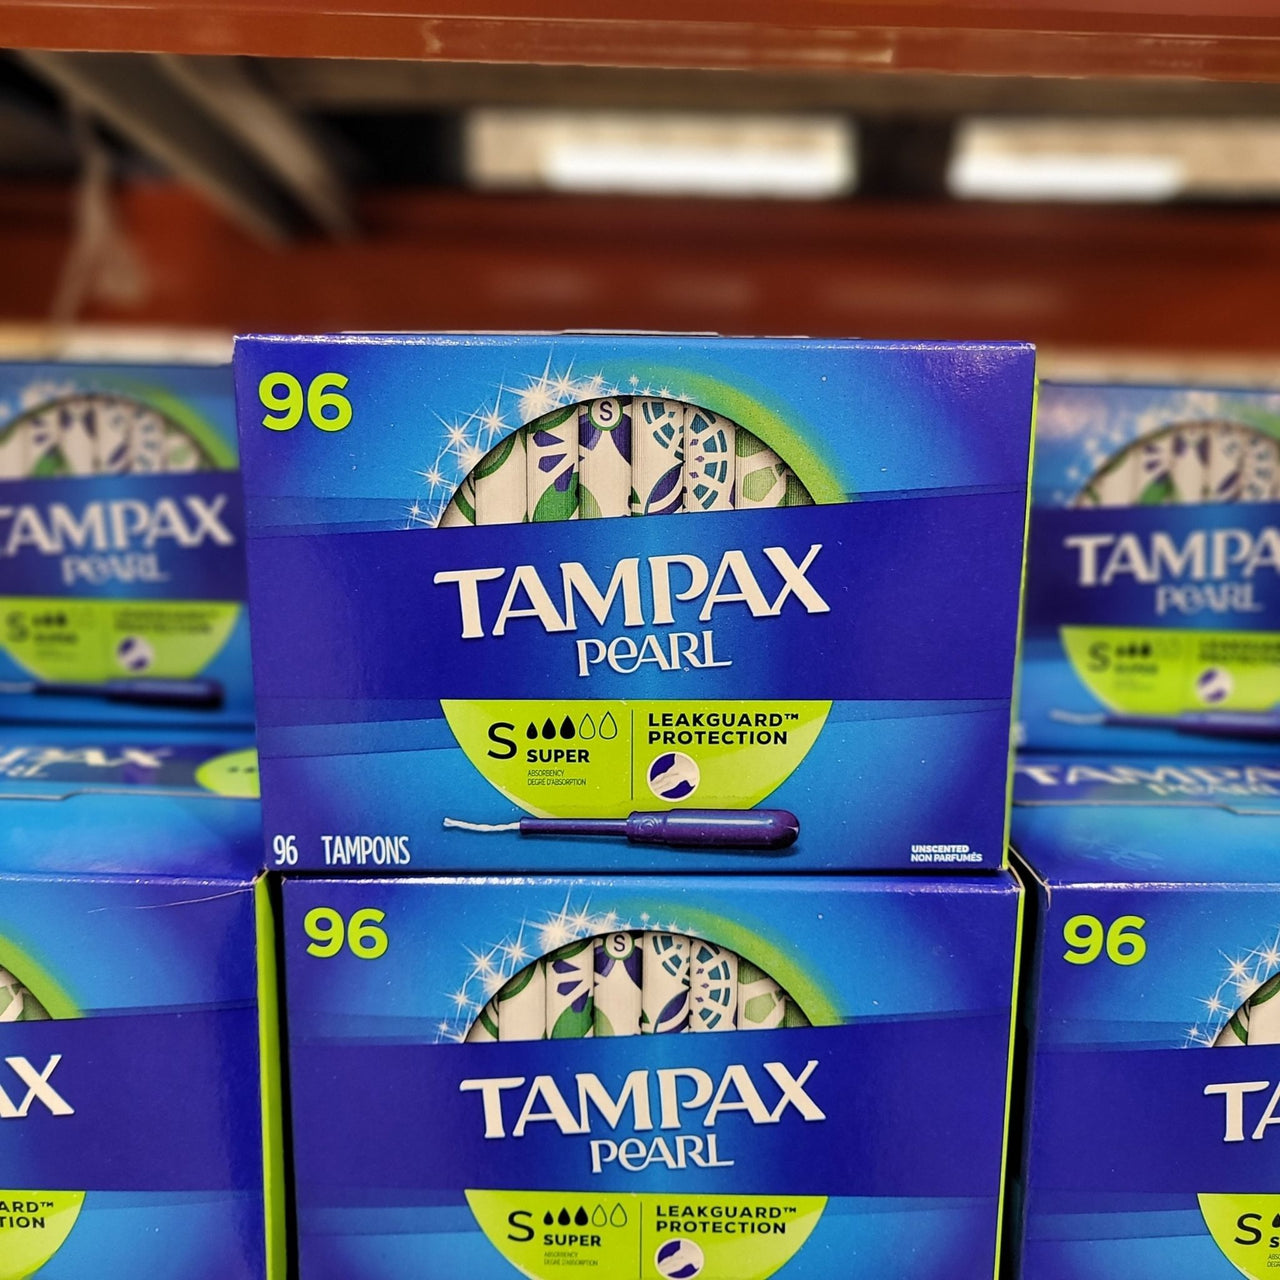 Tampax Pearl, Super Absorbency 96ct Shipped to Nunavut – The